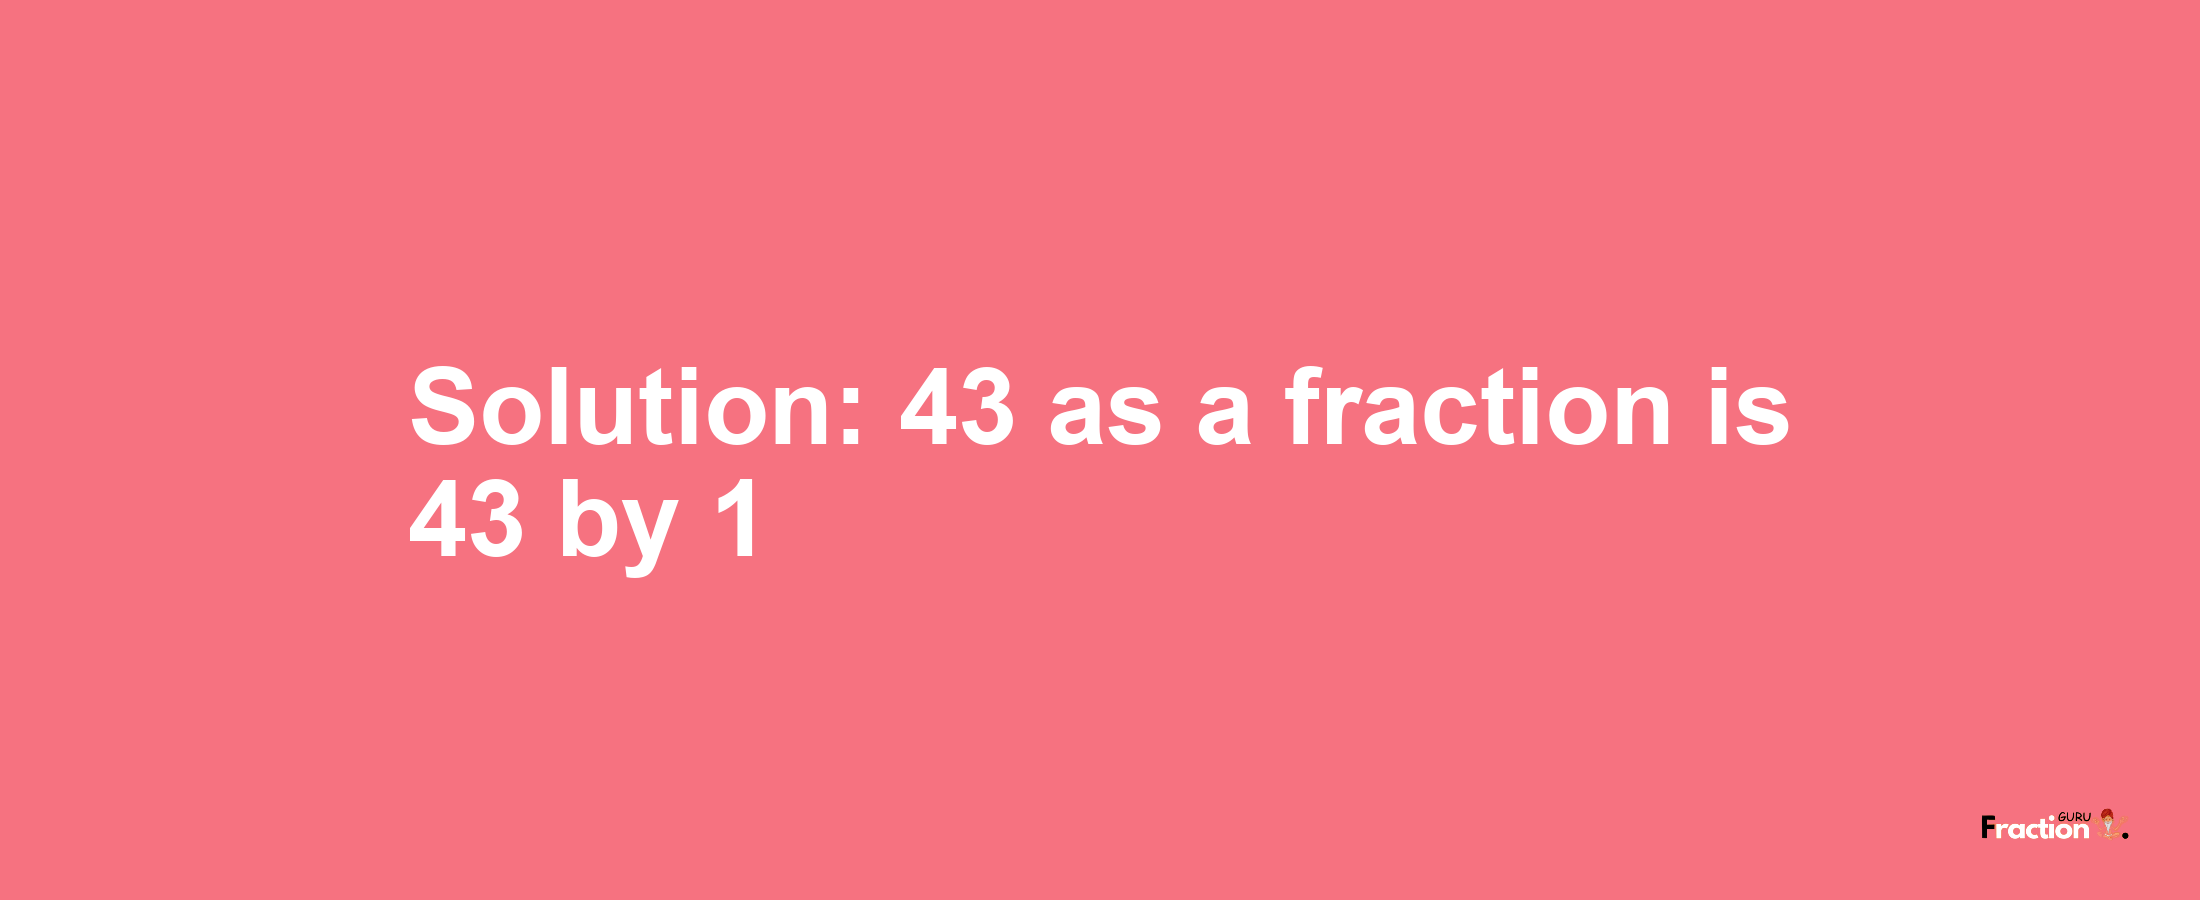 Solution:43 as a fraction is 43/1